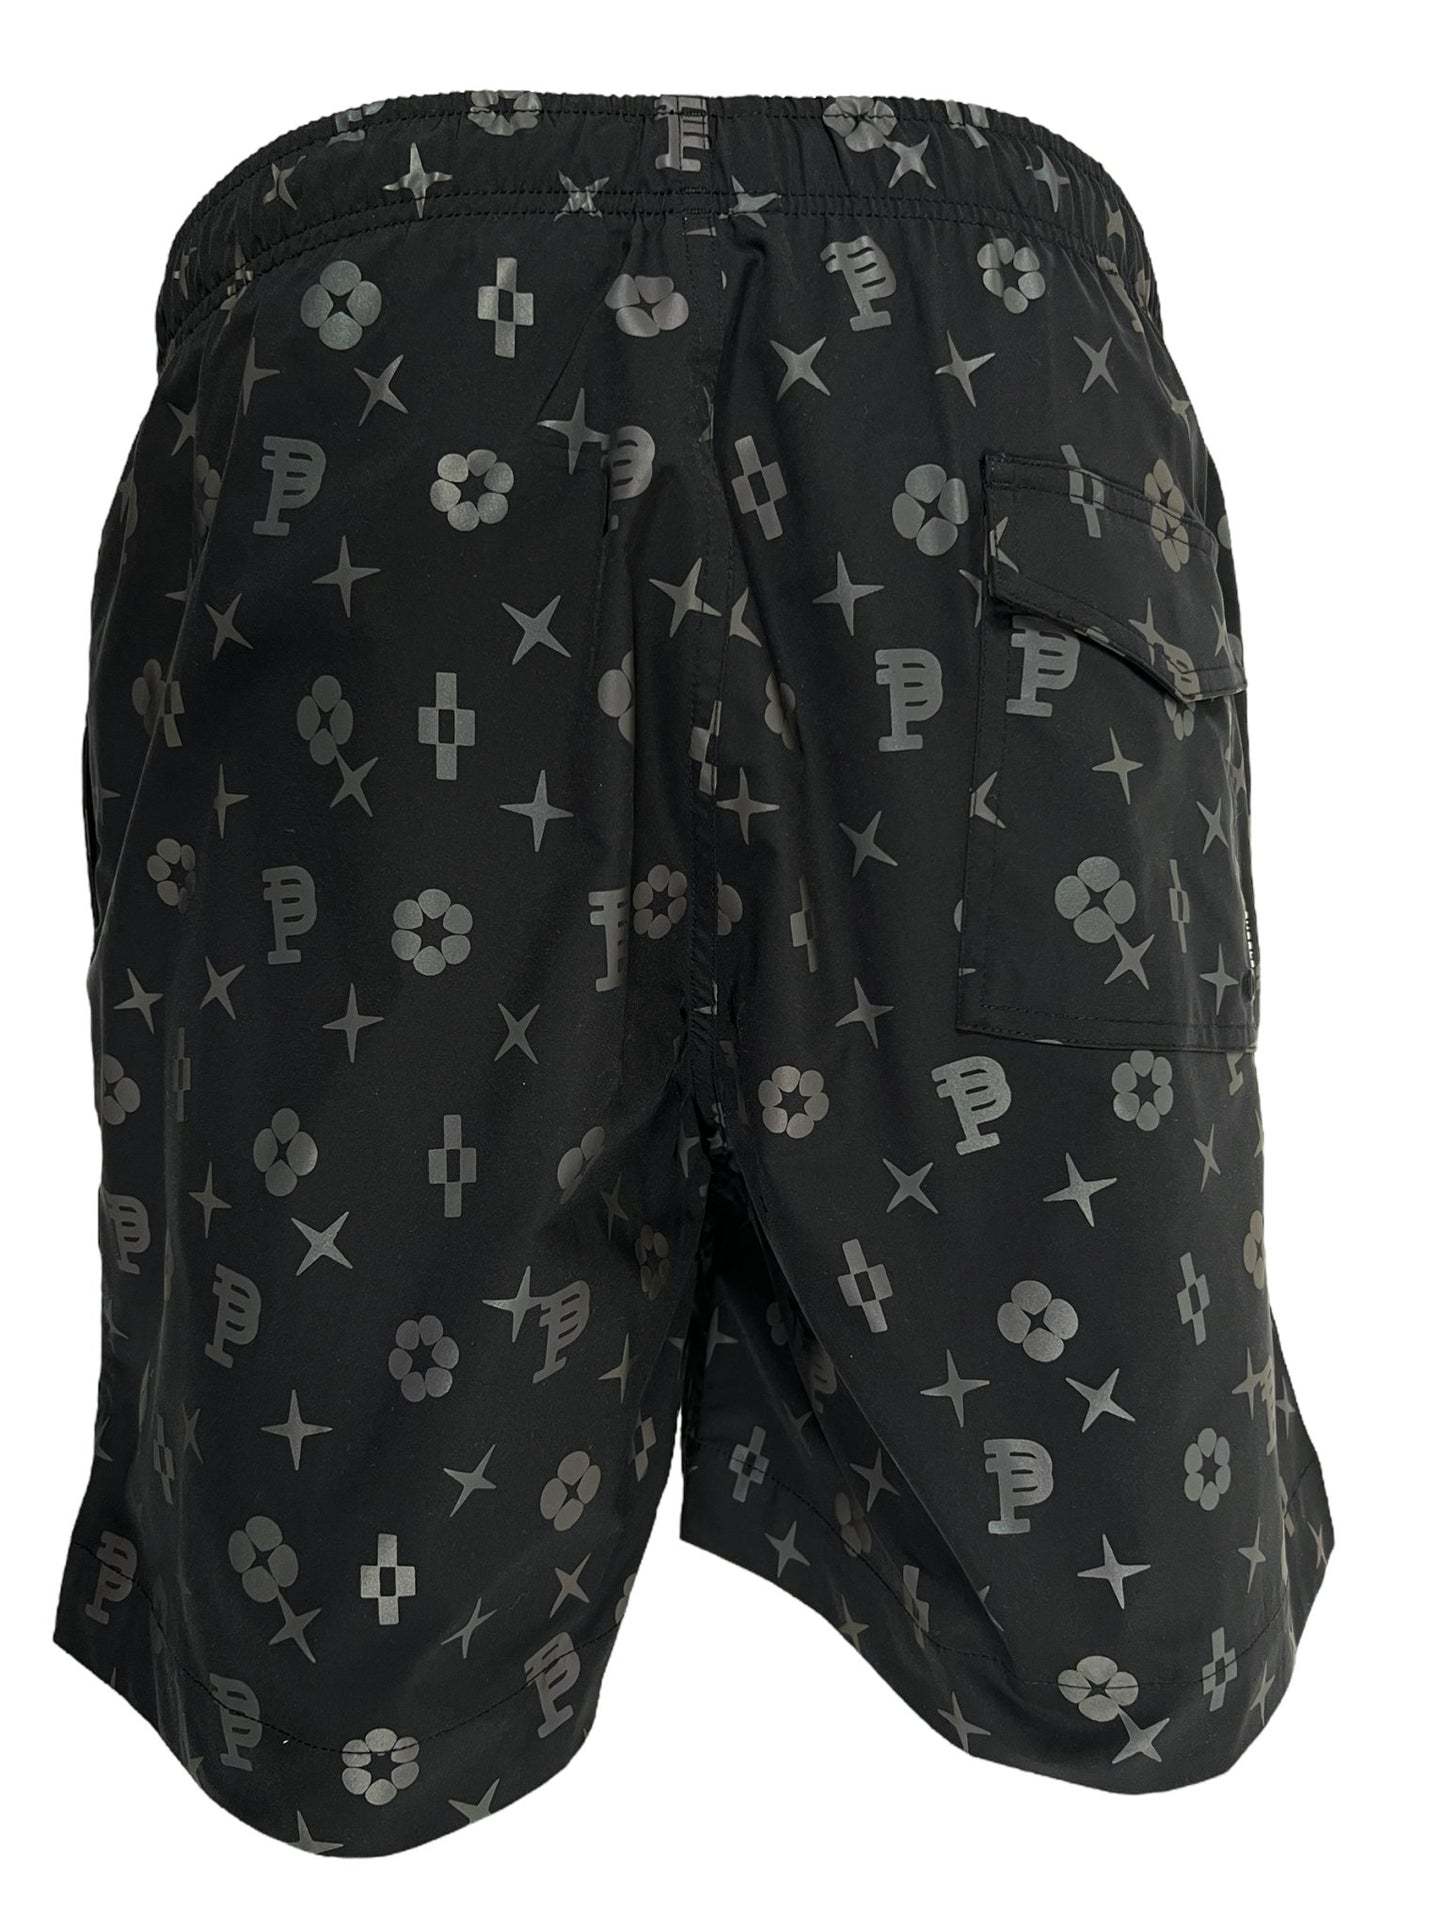 A pair of black shorts with a gray floral and geometric pattern, featuring an elastic waistband and a side pocket. These PURPLE BRAND P504-PBBH ALL ROUND SHORT AOP showcase a unique design perfect for standout summer style.